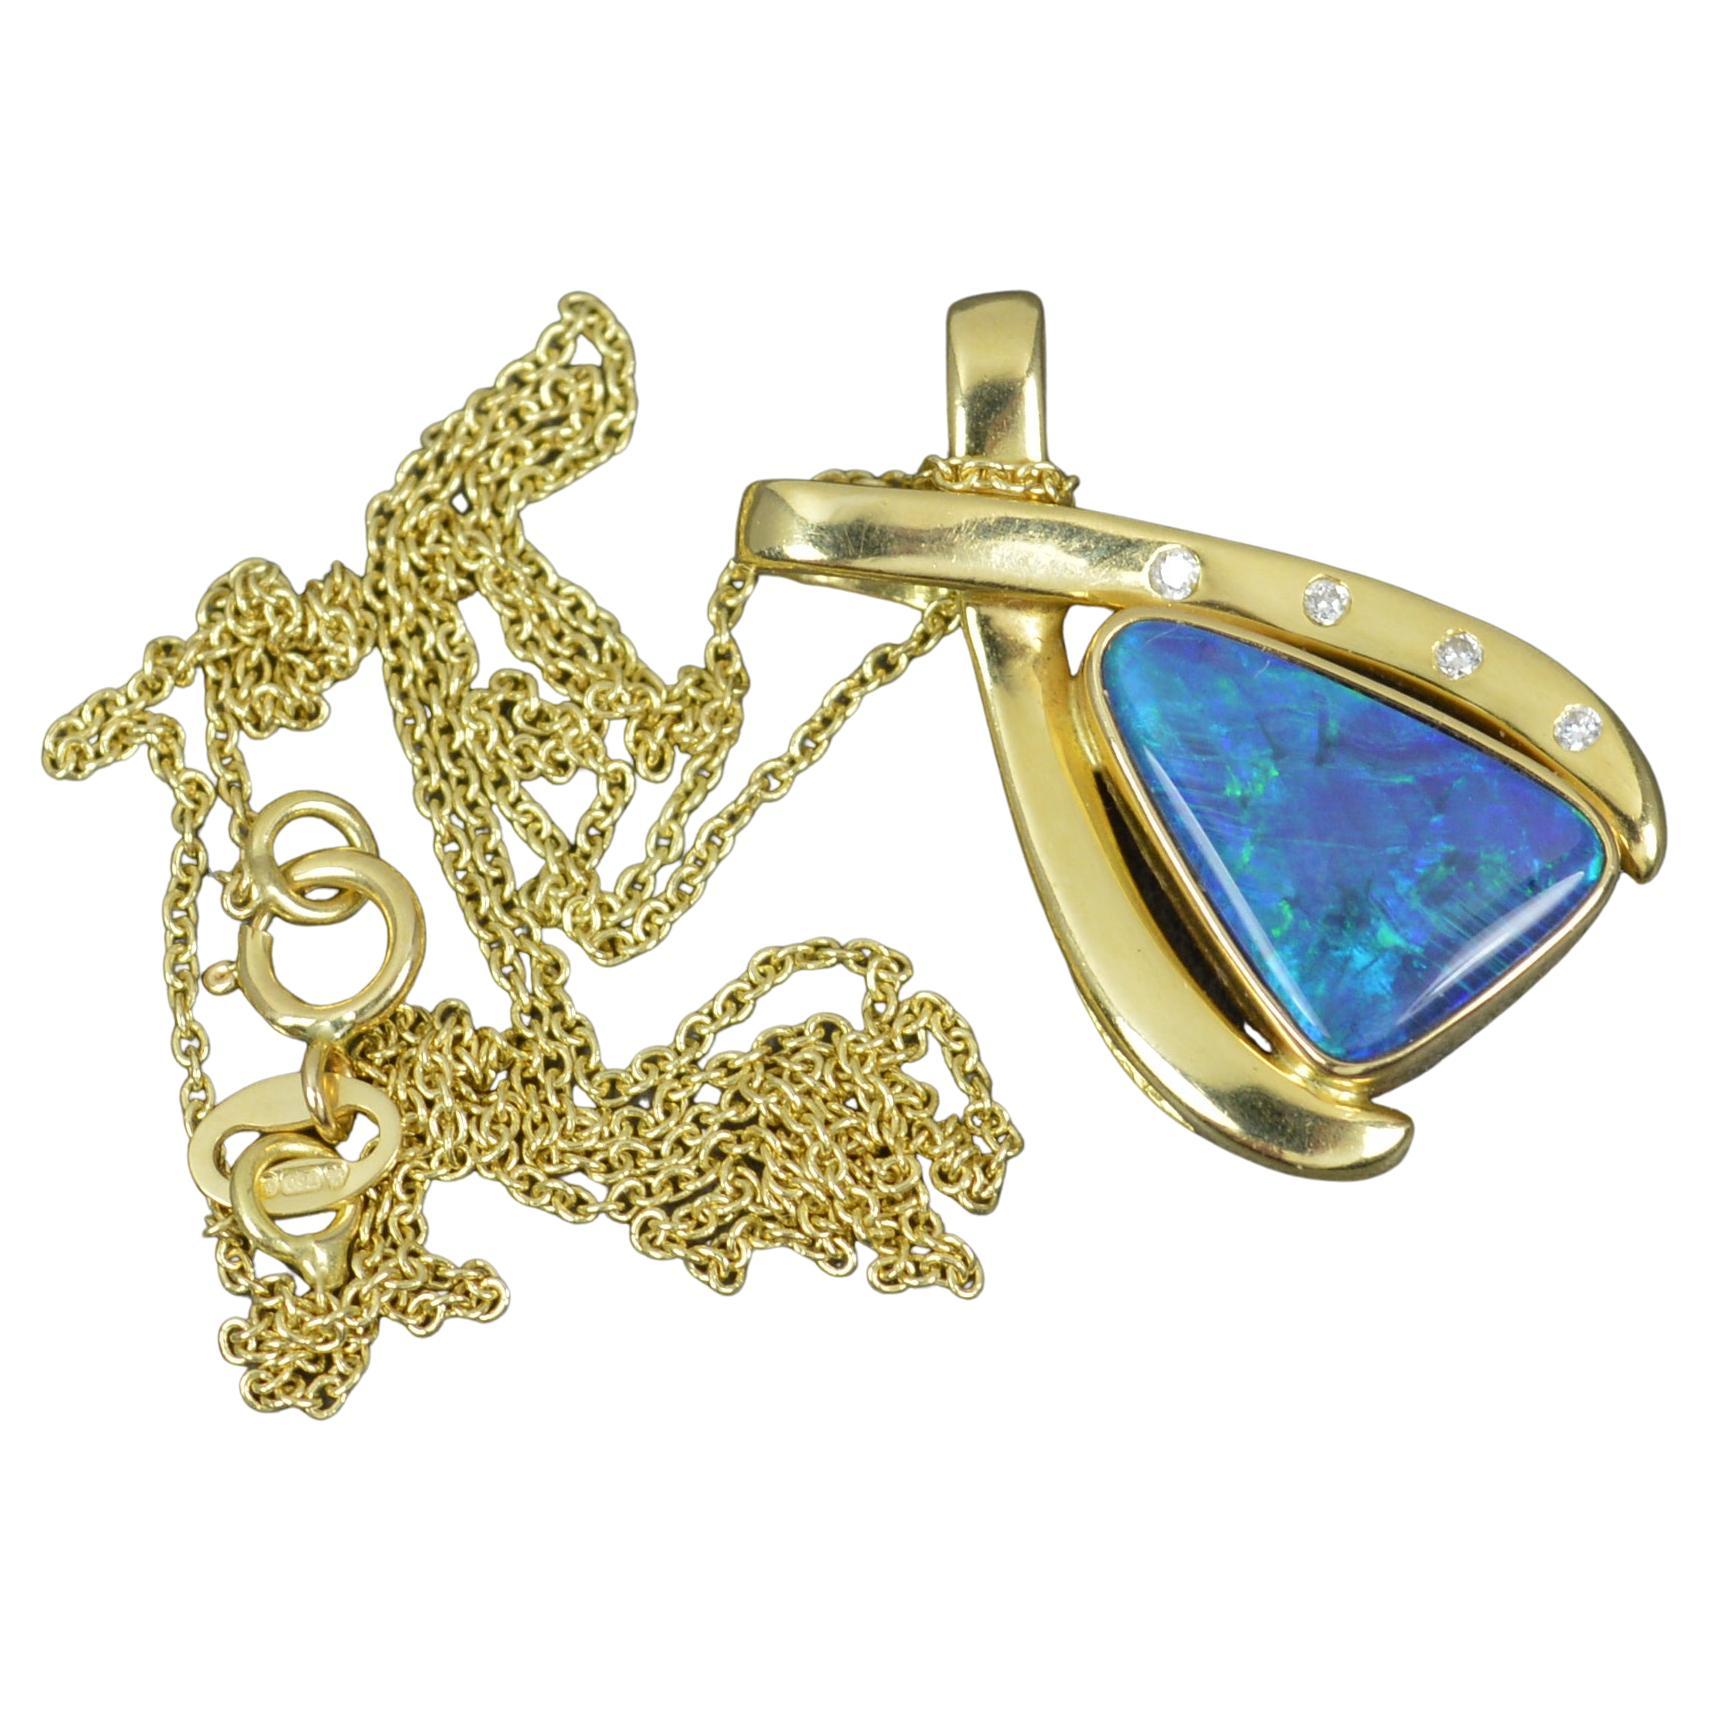 Impressive 18 Carat Gold Opal and Diamond Pendant and Chain For Sale